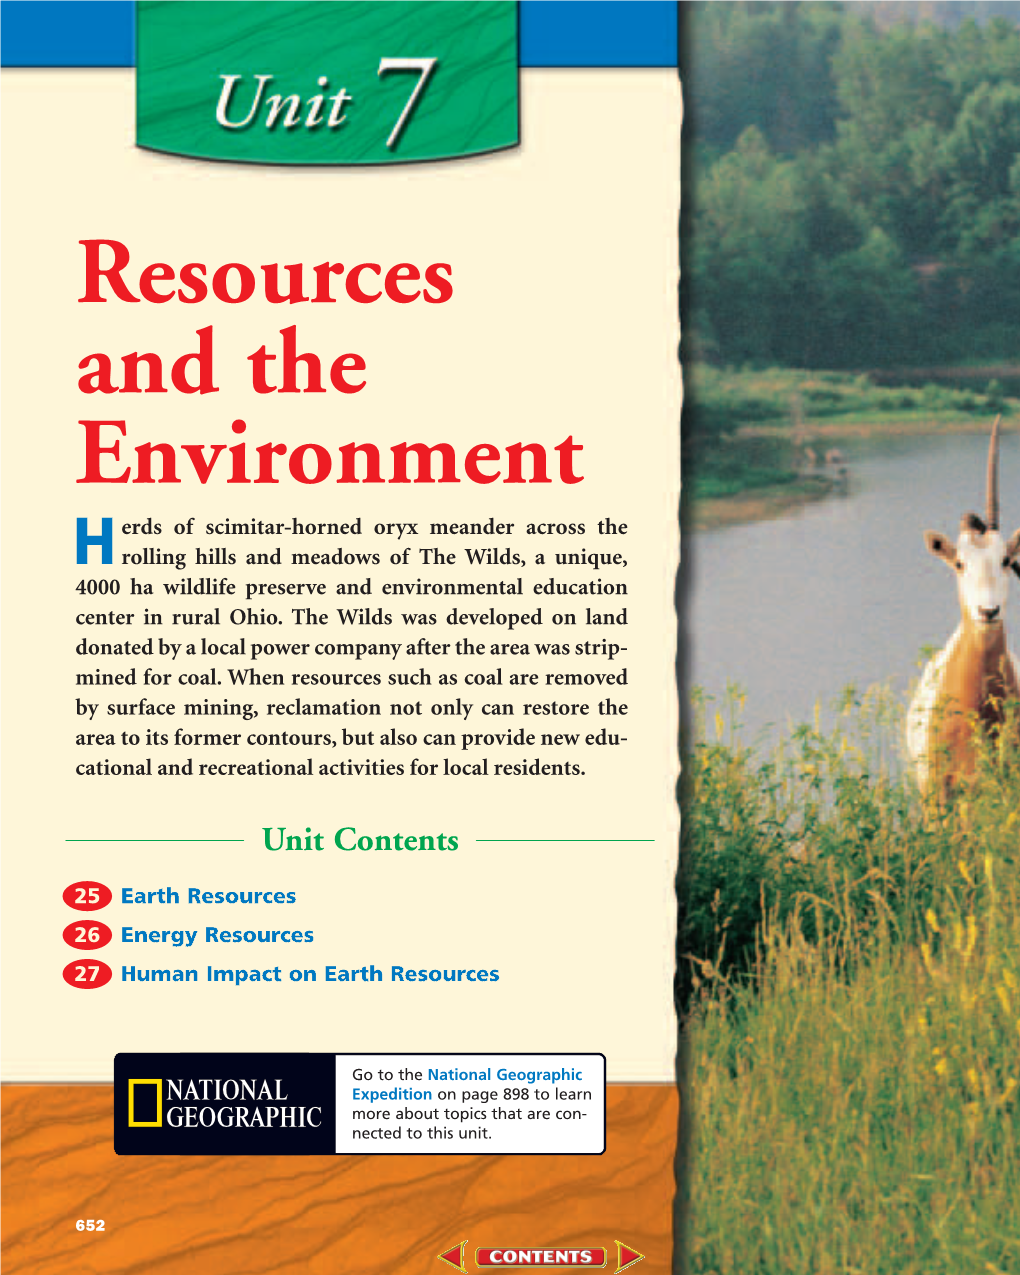 Chapter 25: Earth Resources